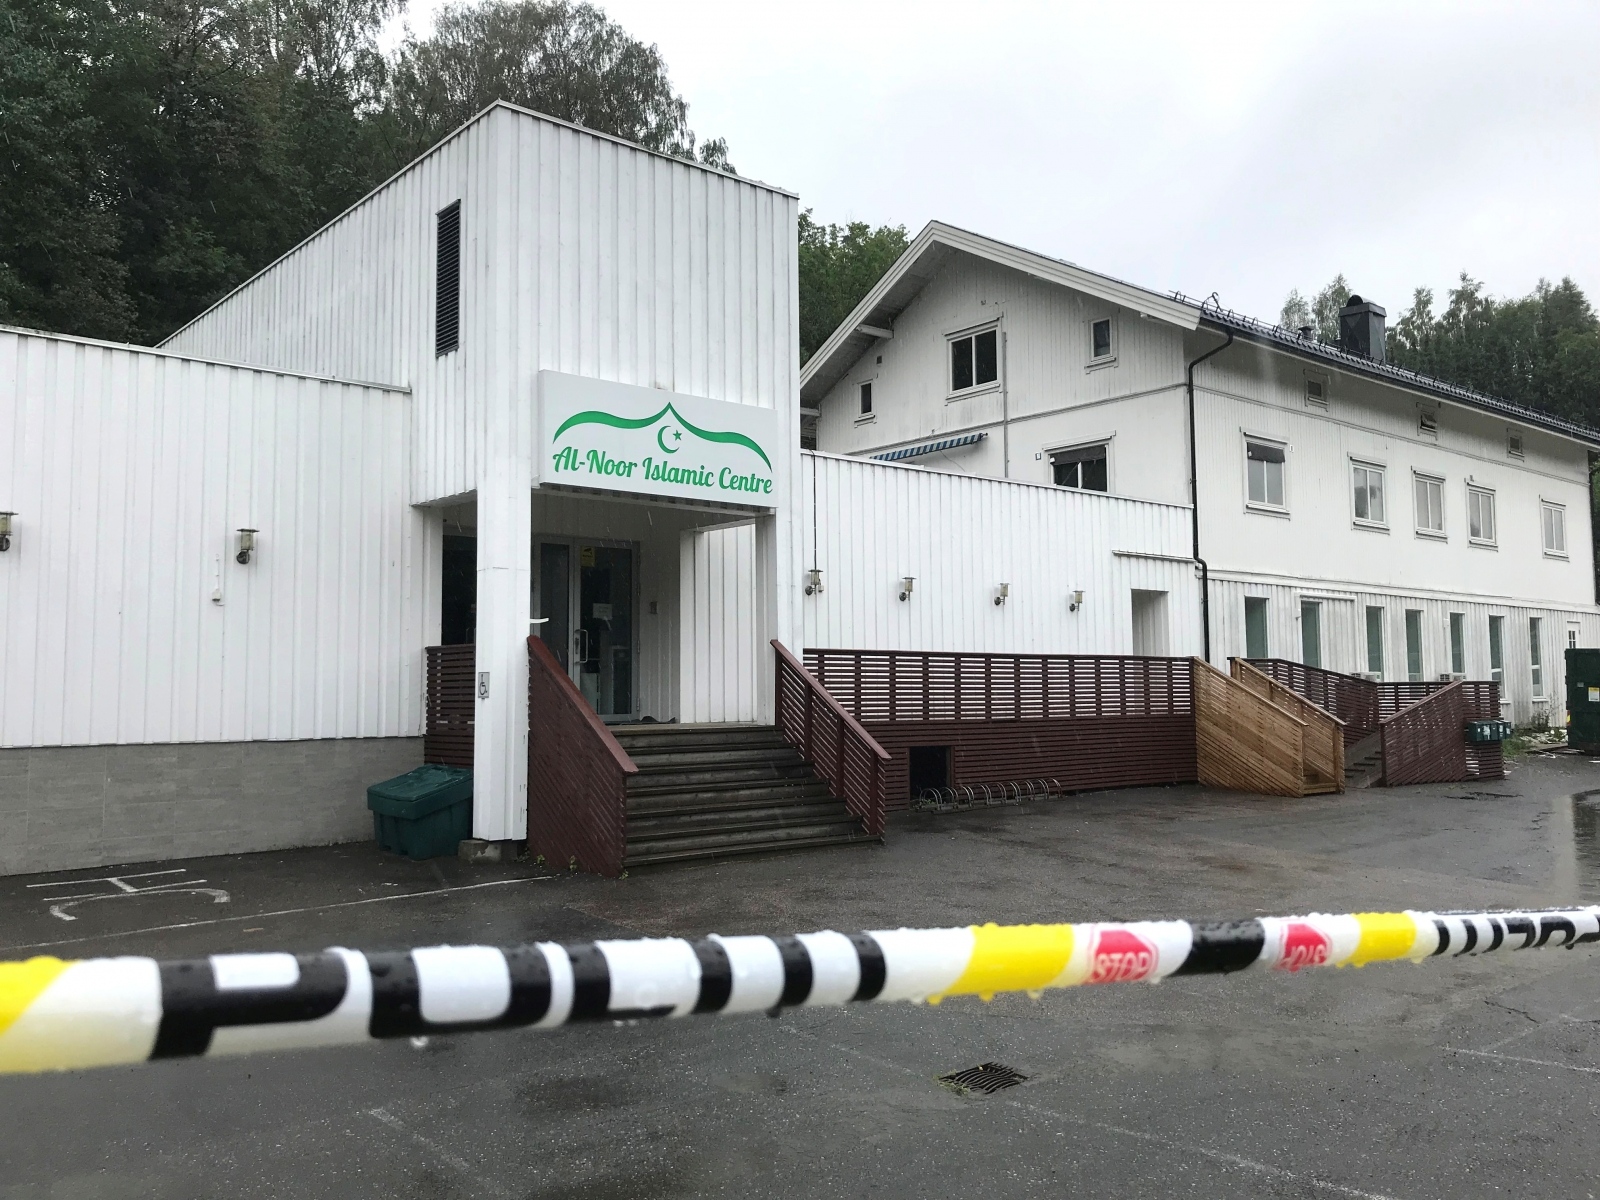 A view of the al-Noor Islamic Centre mosque in Sandvika A view of the al-Noor Islamic Centre mosque in Sandvika, Norway August 11, 2019. REUTERS/Lefteris Karagiannopoulos LEFTERIS KARAGIANNOPOULOS